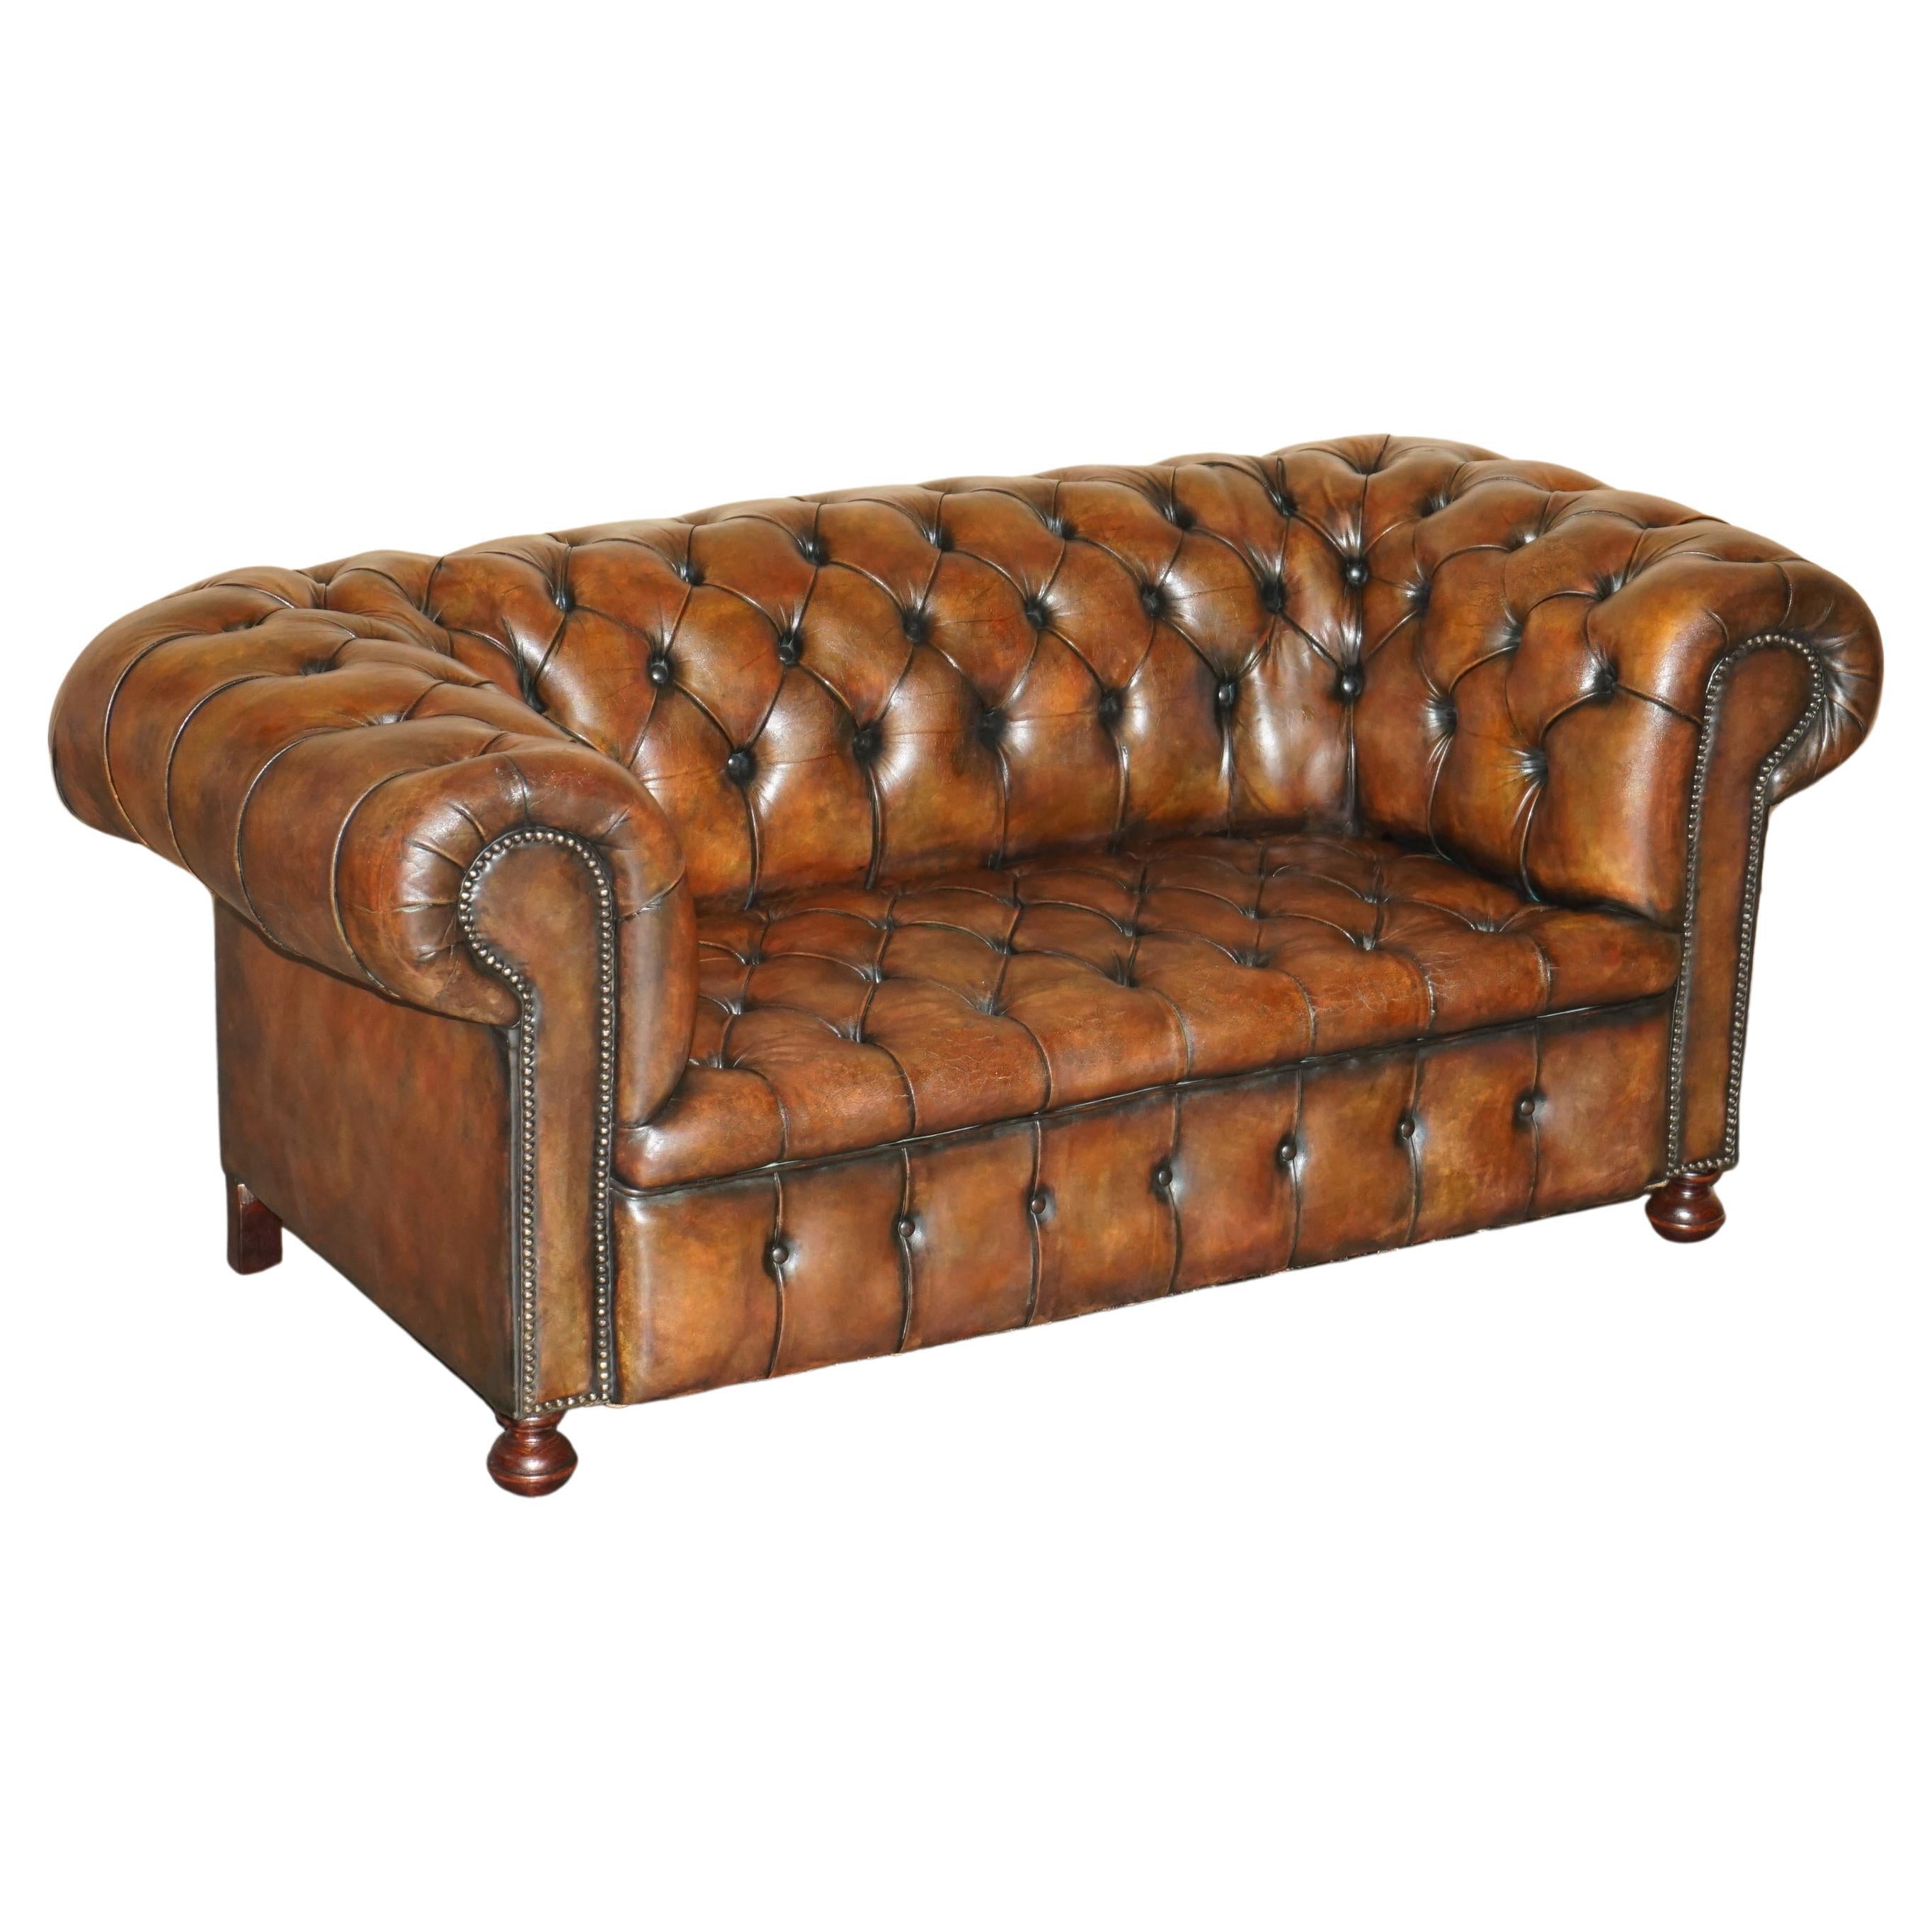 RESTORED VICTORiAN 1890 EXTRA LARGE ARMED CHESTERFIELD BROWN LEATHER CLUB SOFA For Sale